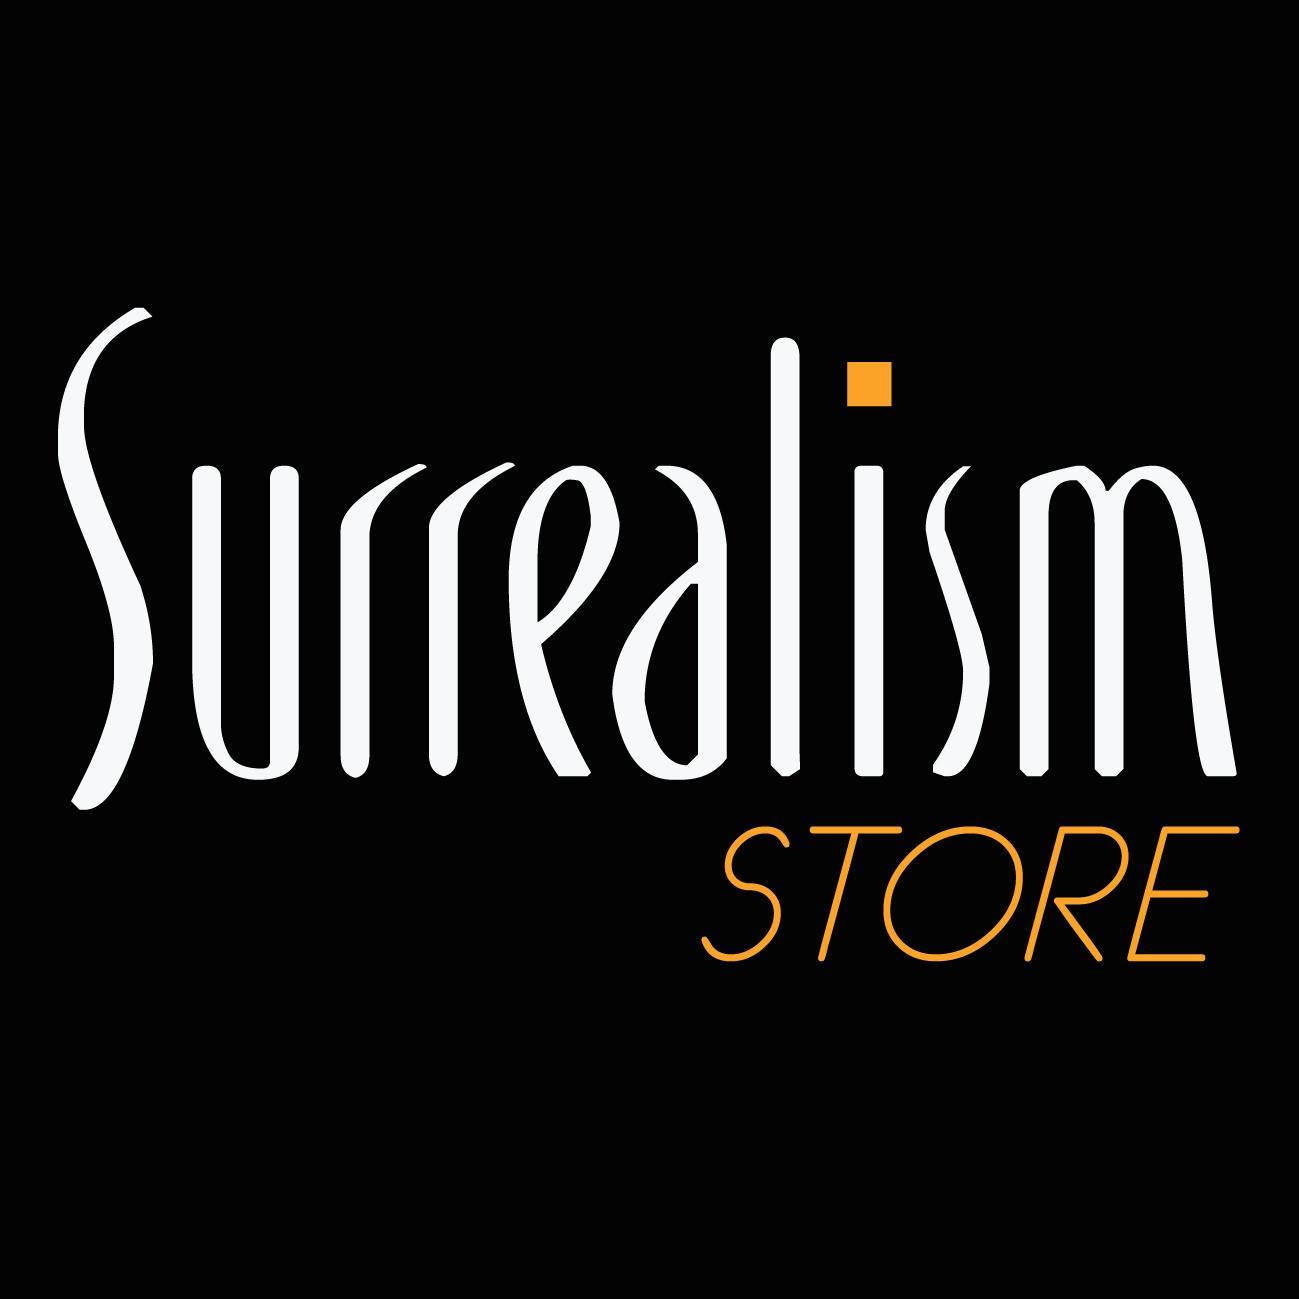 Surrealism Store is the online shop of Llibreria Surrealista, the only shop that was designed by Salvador Dalí. Share with us this surreal experience.